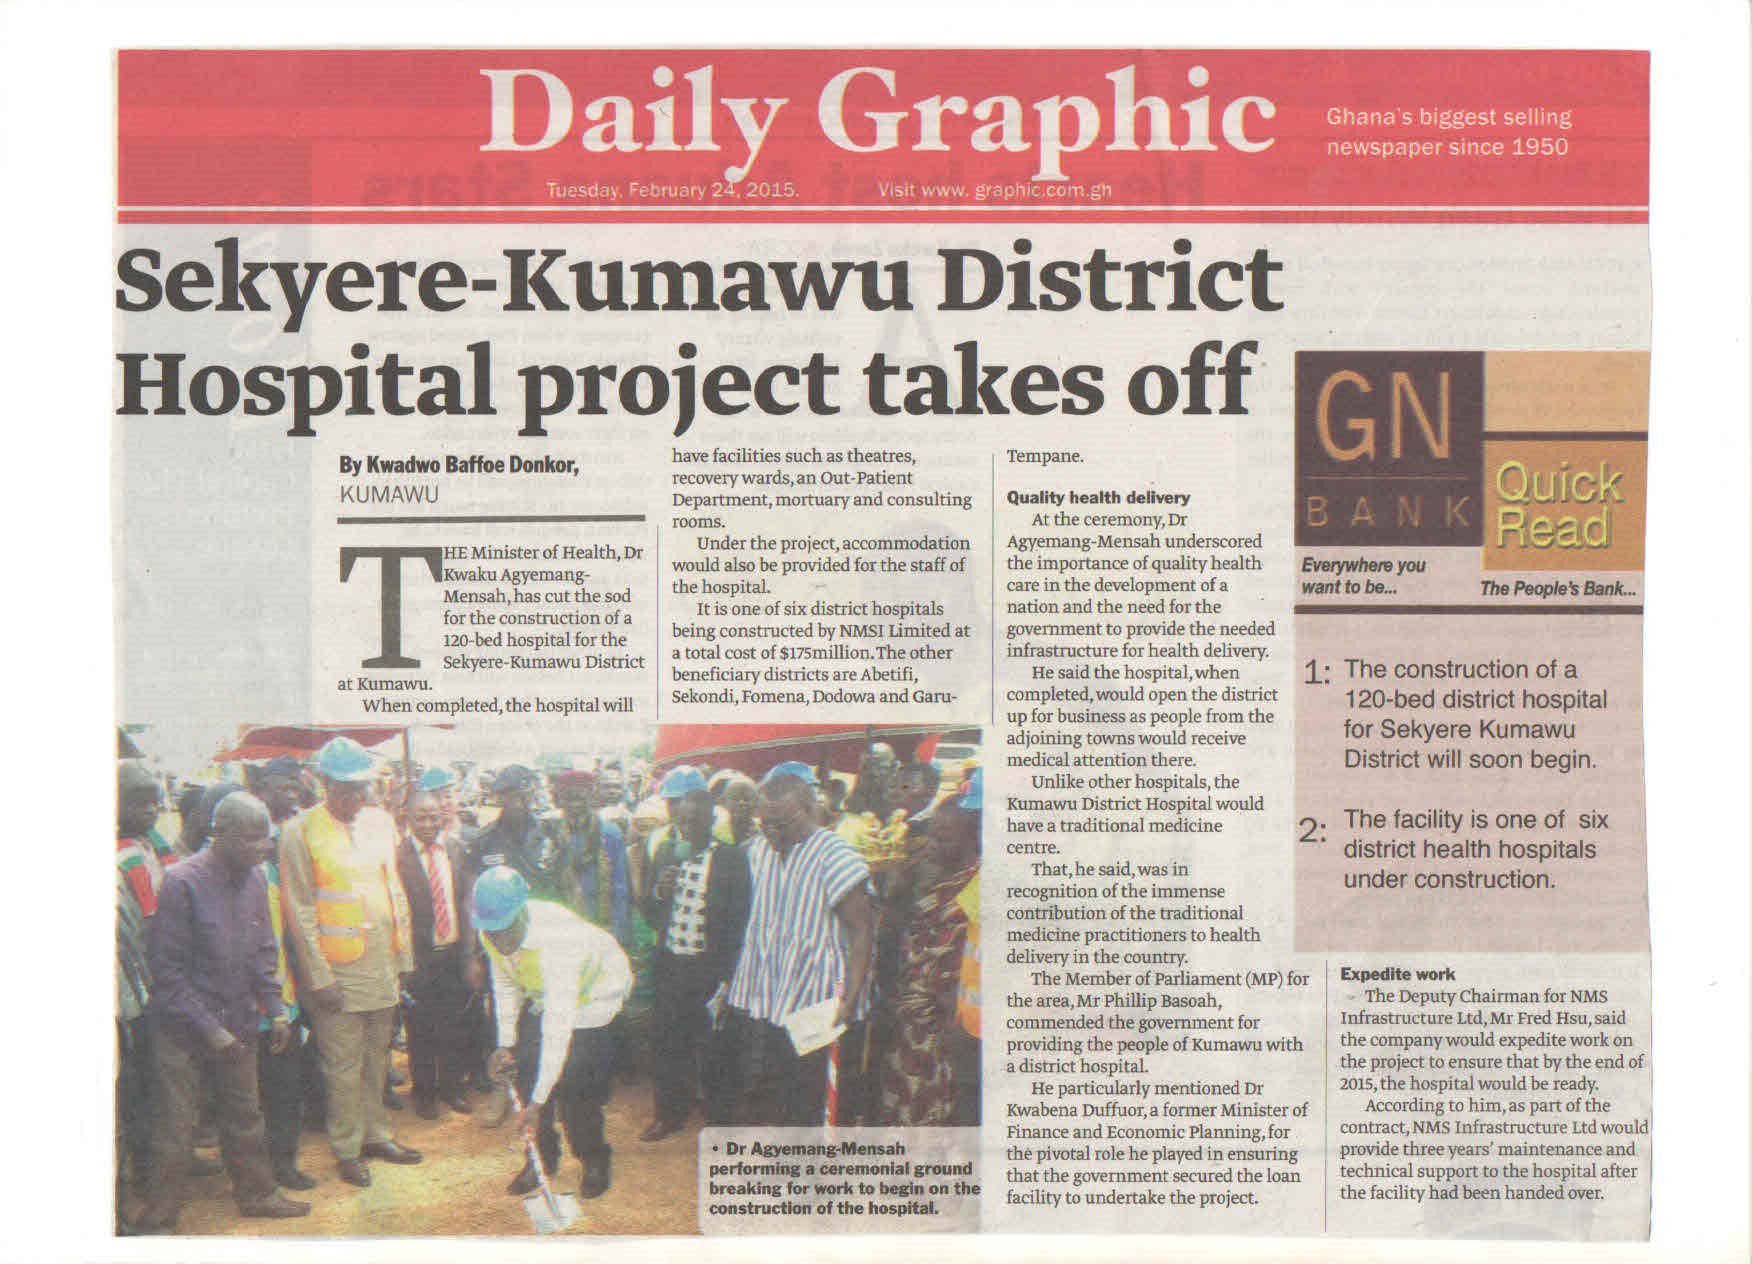 Kumawu sod-cutting covered in the Daily Graphic